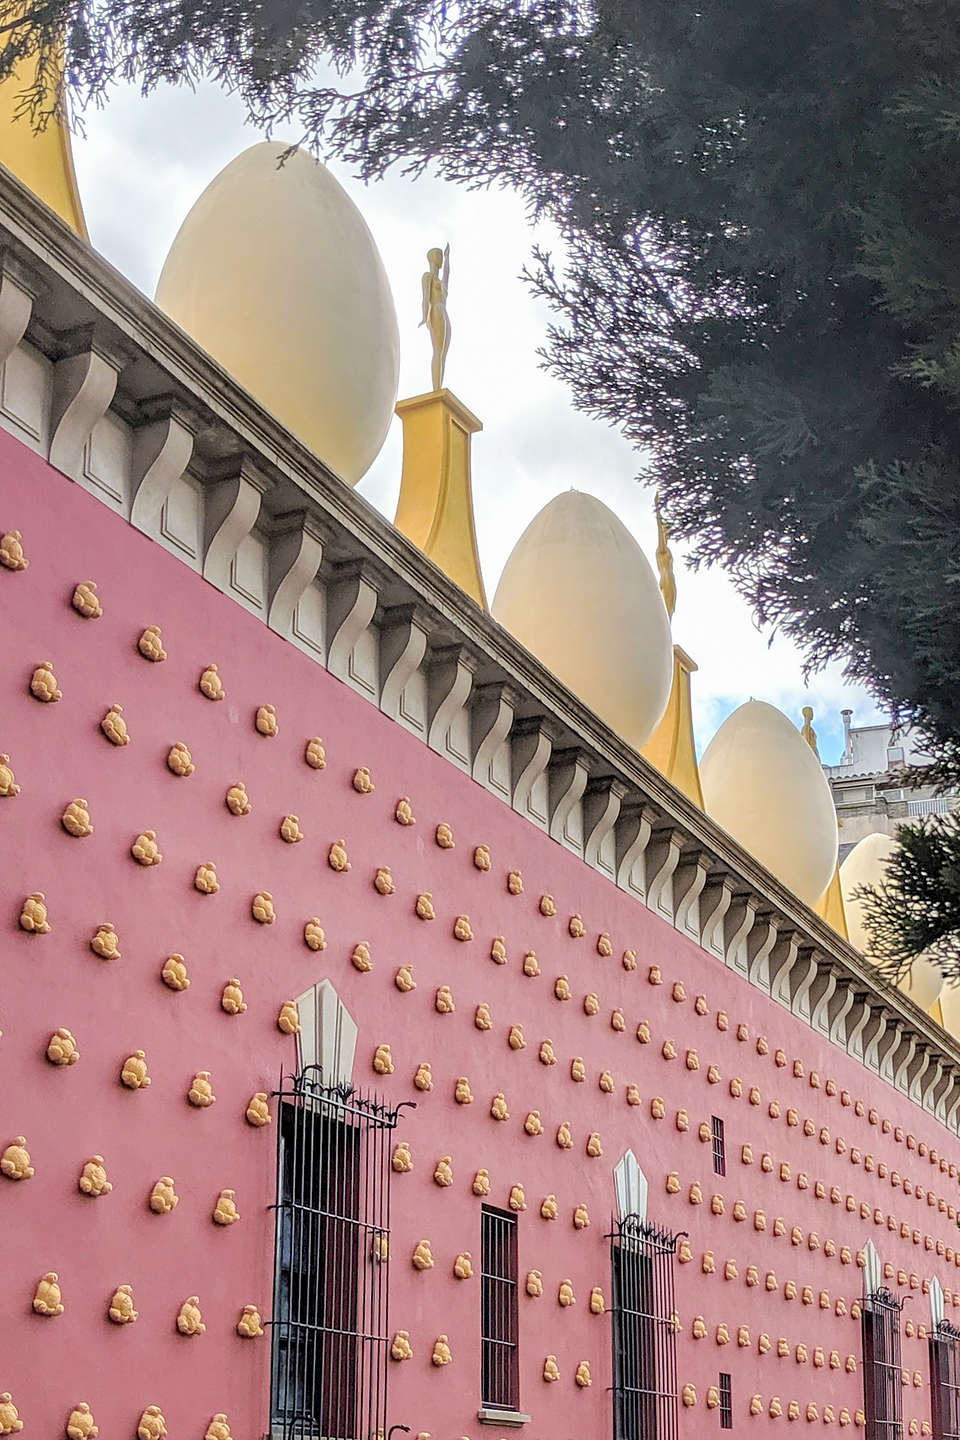 Exterior of the Salvador Dali Museum studded with plaster-covered croissants, and a roof topped with giant eggs and Oscars